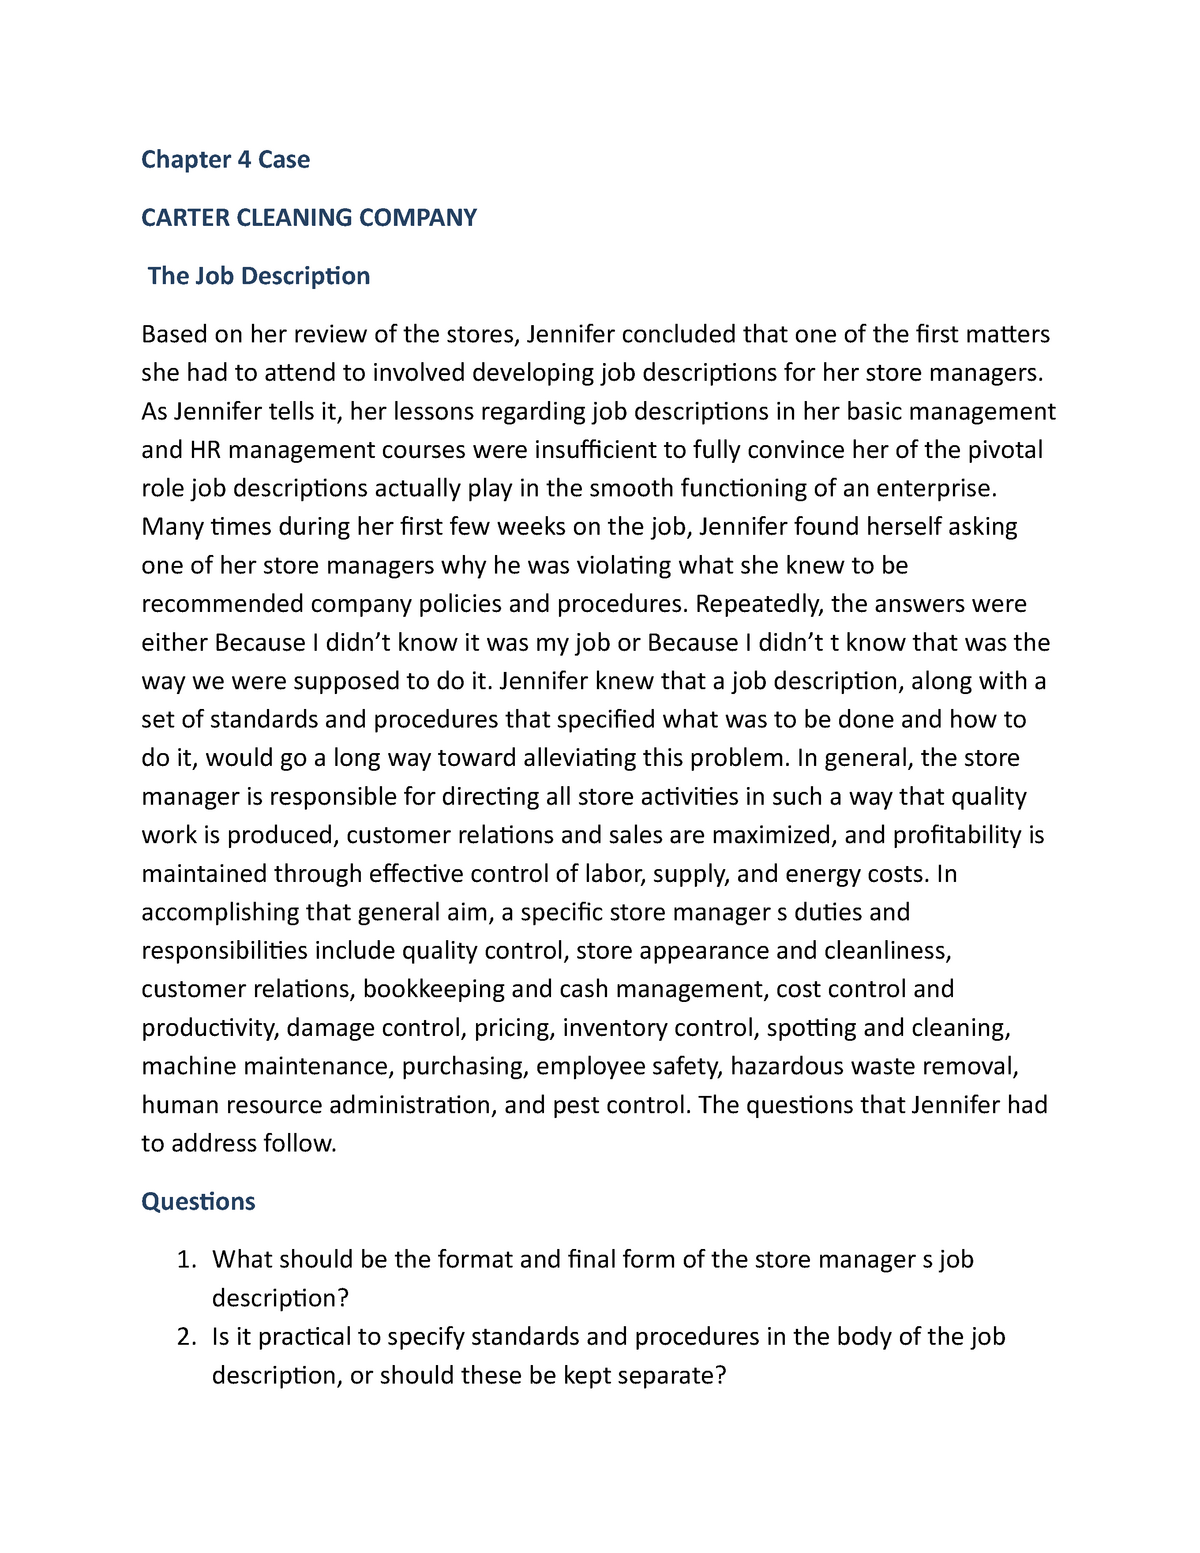 carter cleaning company case study solution chapter 4